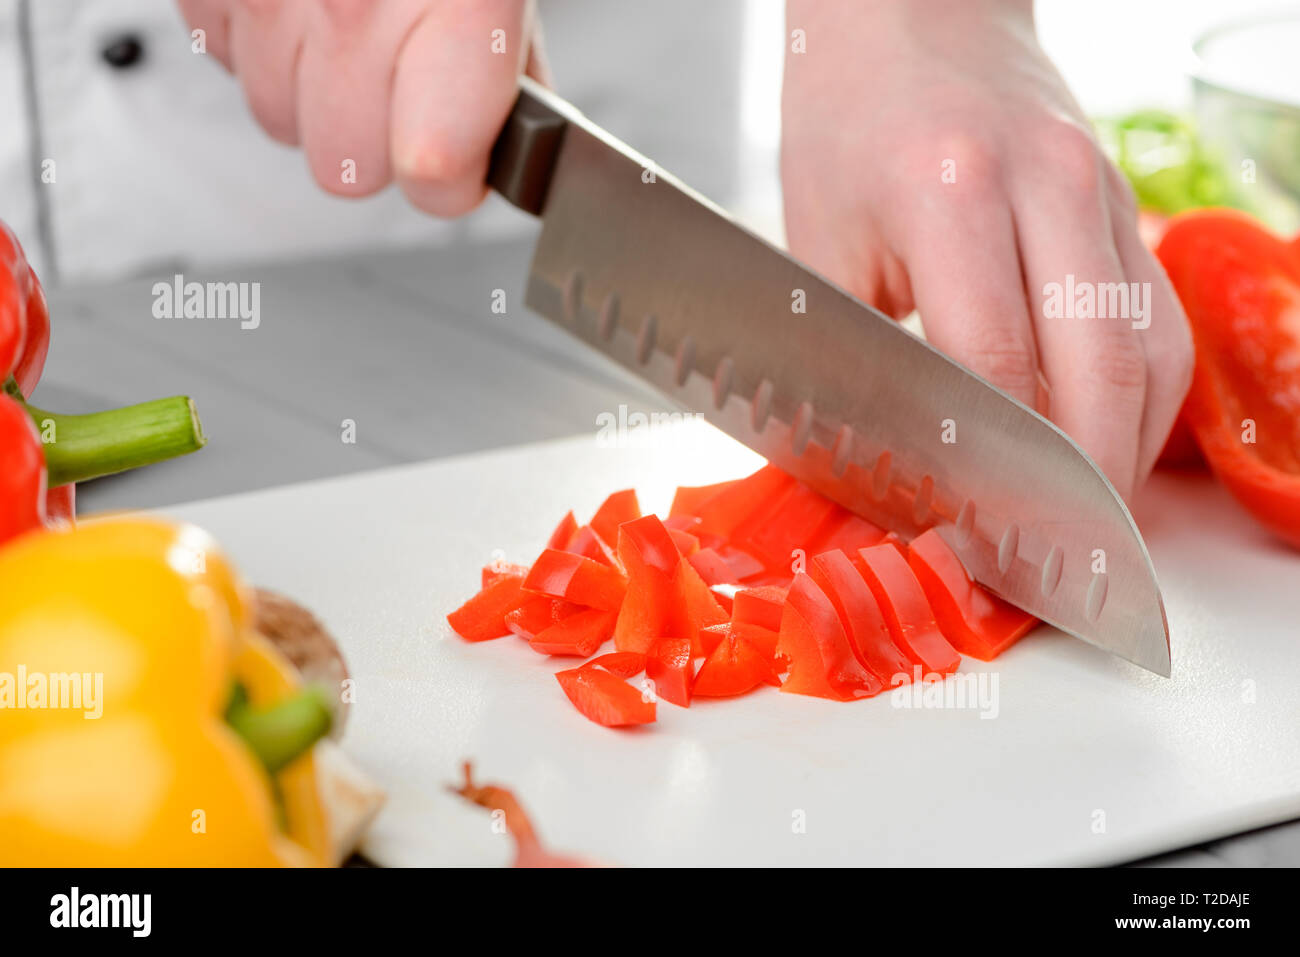 https://c8.alamy.com/comp/T2DAJE/chef-dicing-a-red-bell-pepper-with-a-sharp-santoku-knife-cooking-healthy-eating-vegetarian-food-T2DAJE.jpg